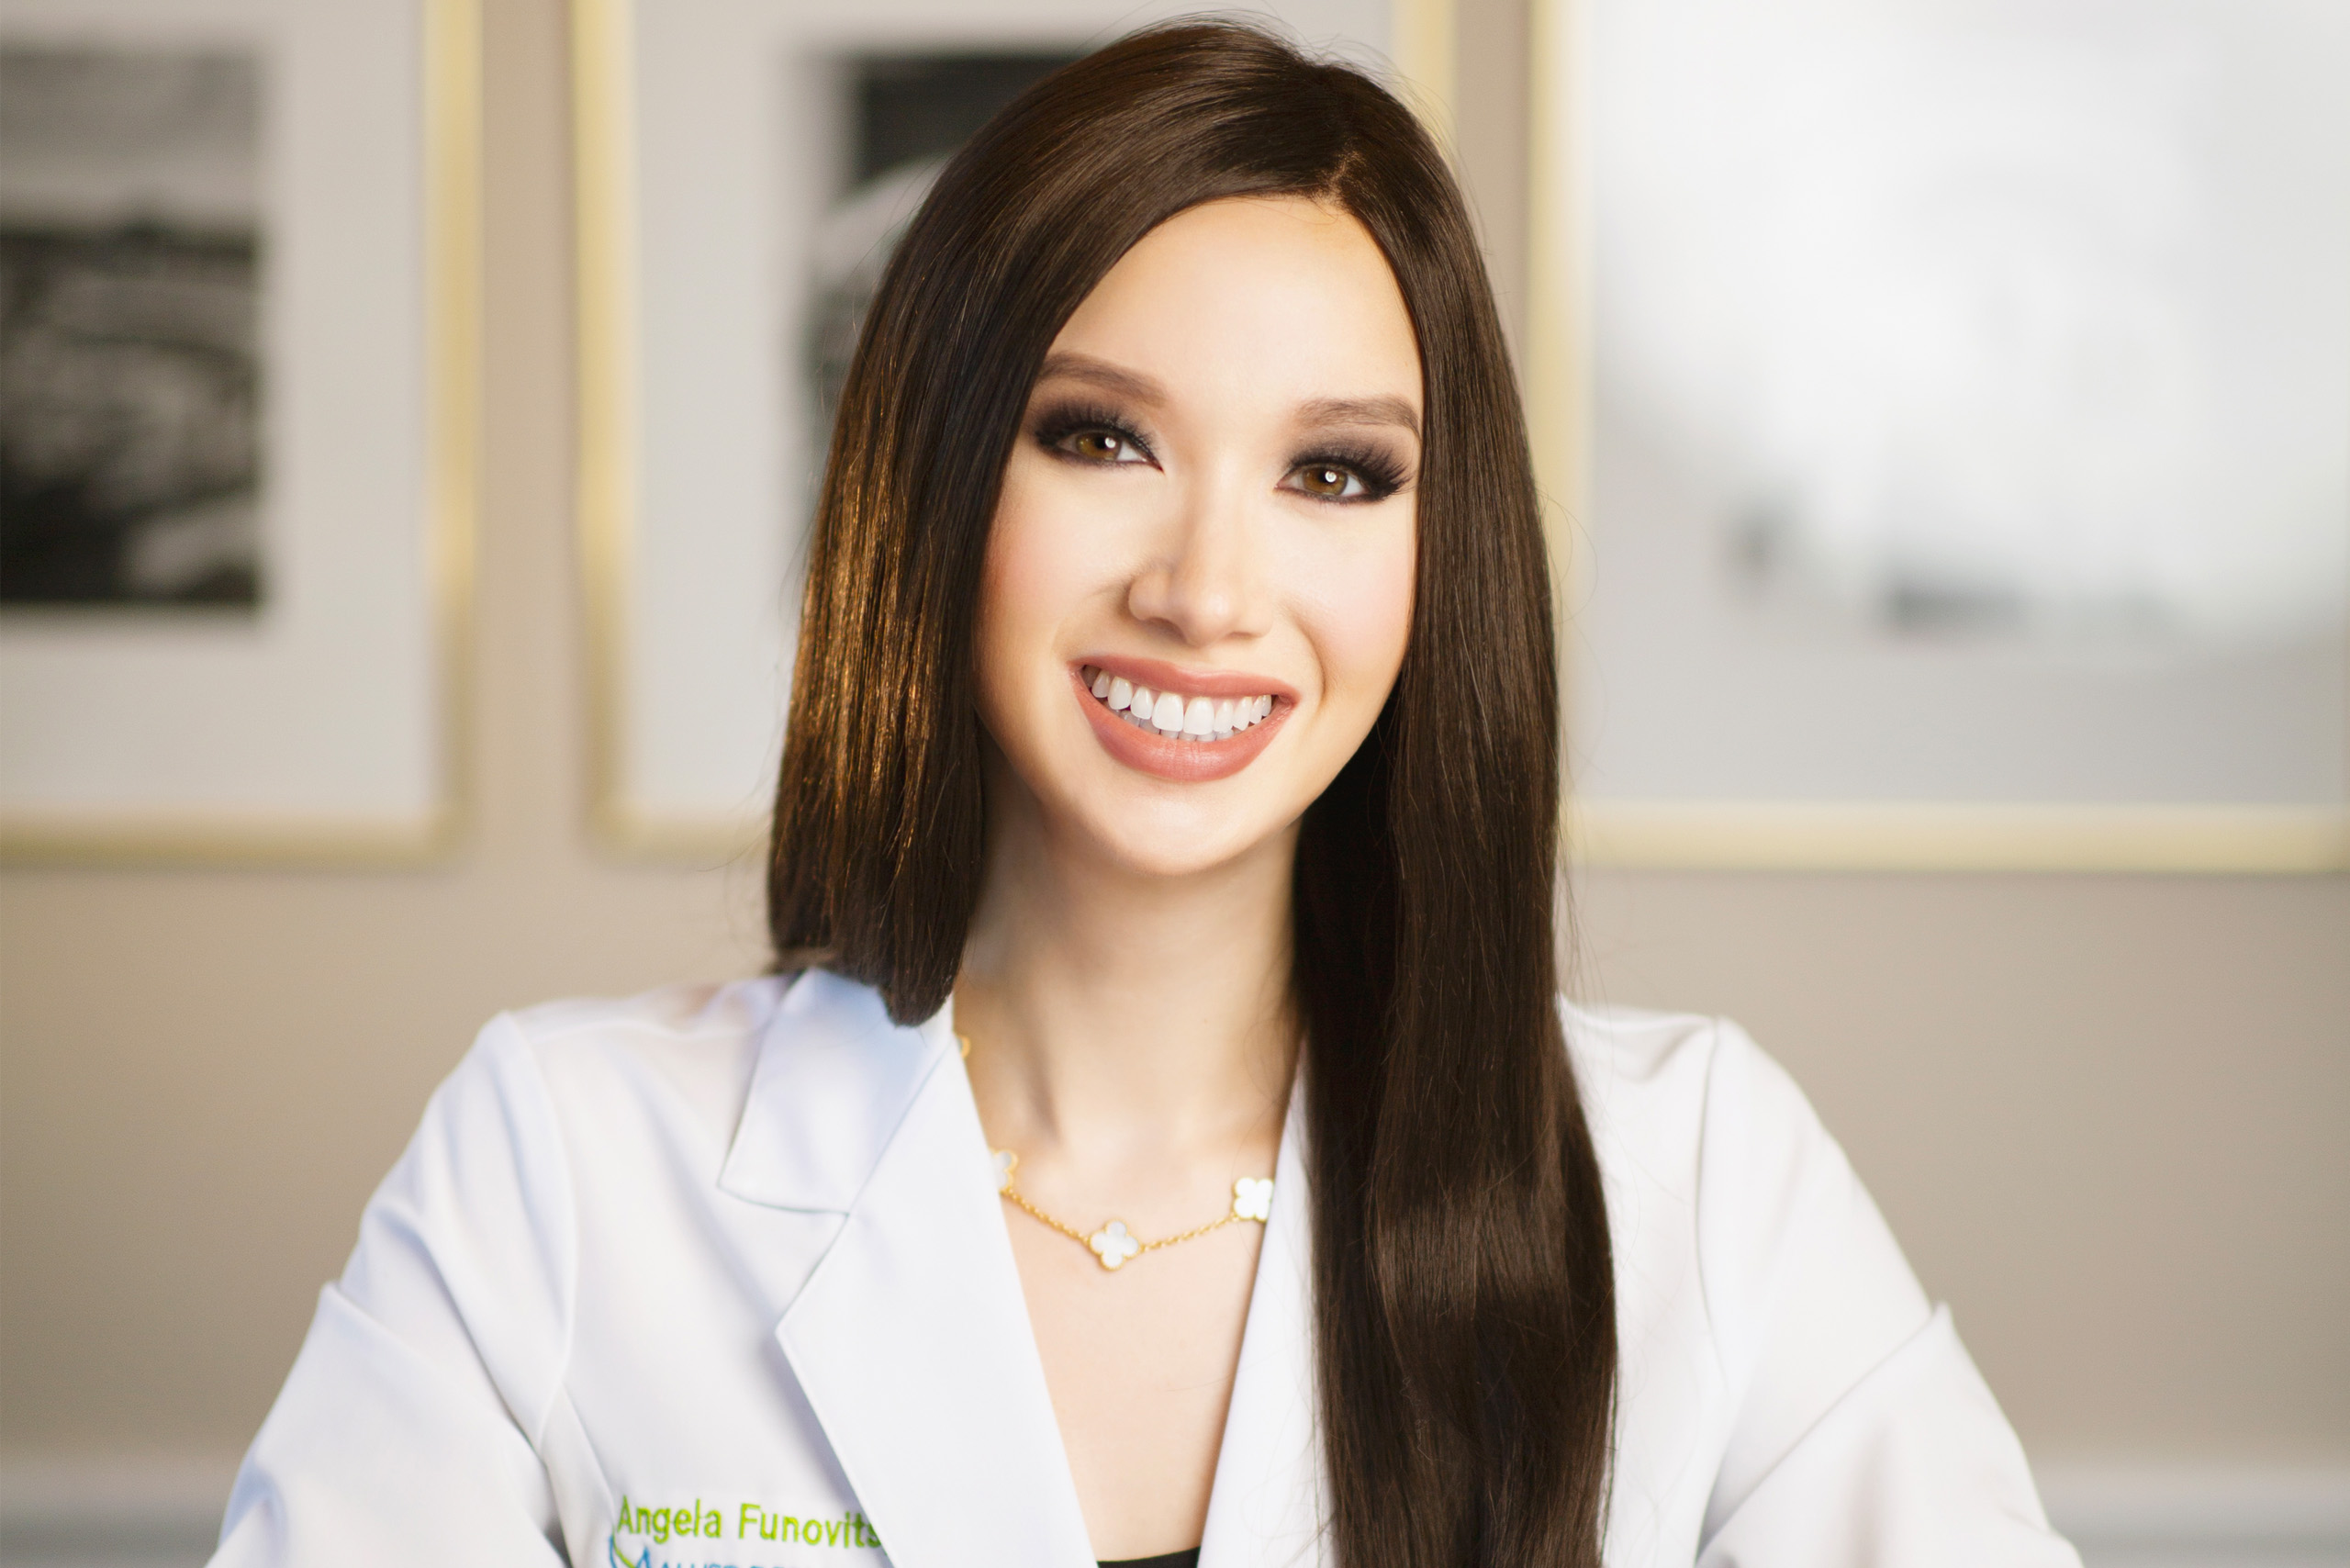 Dermatological Services to Expect from a Cosmetic Physician